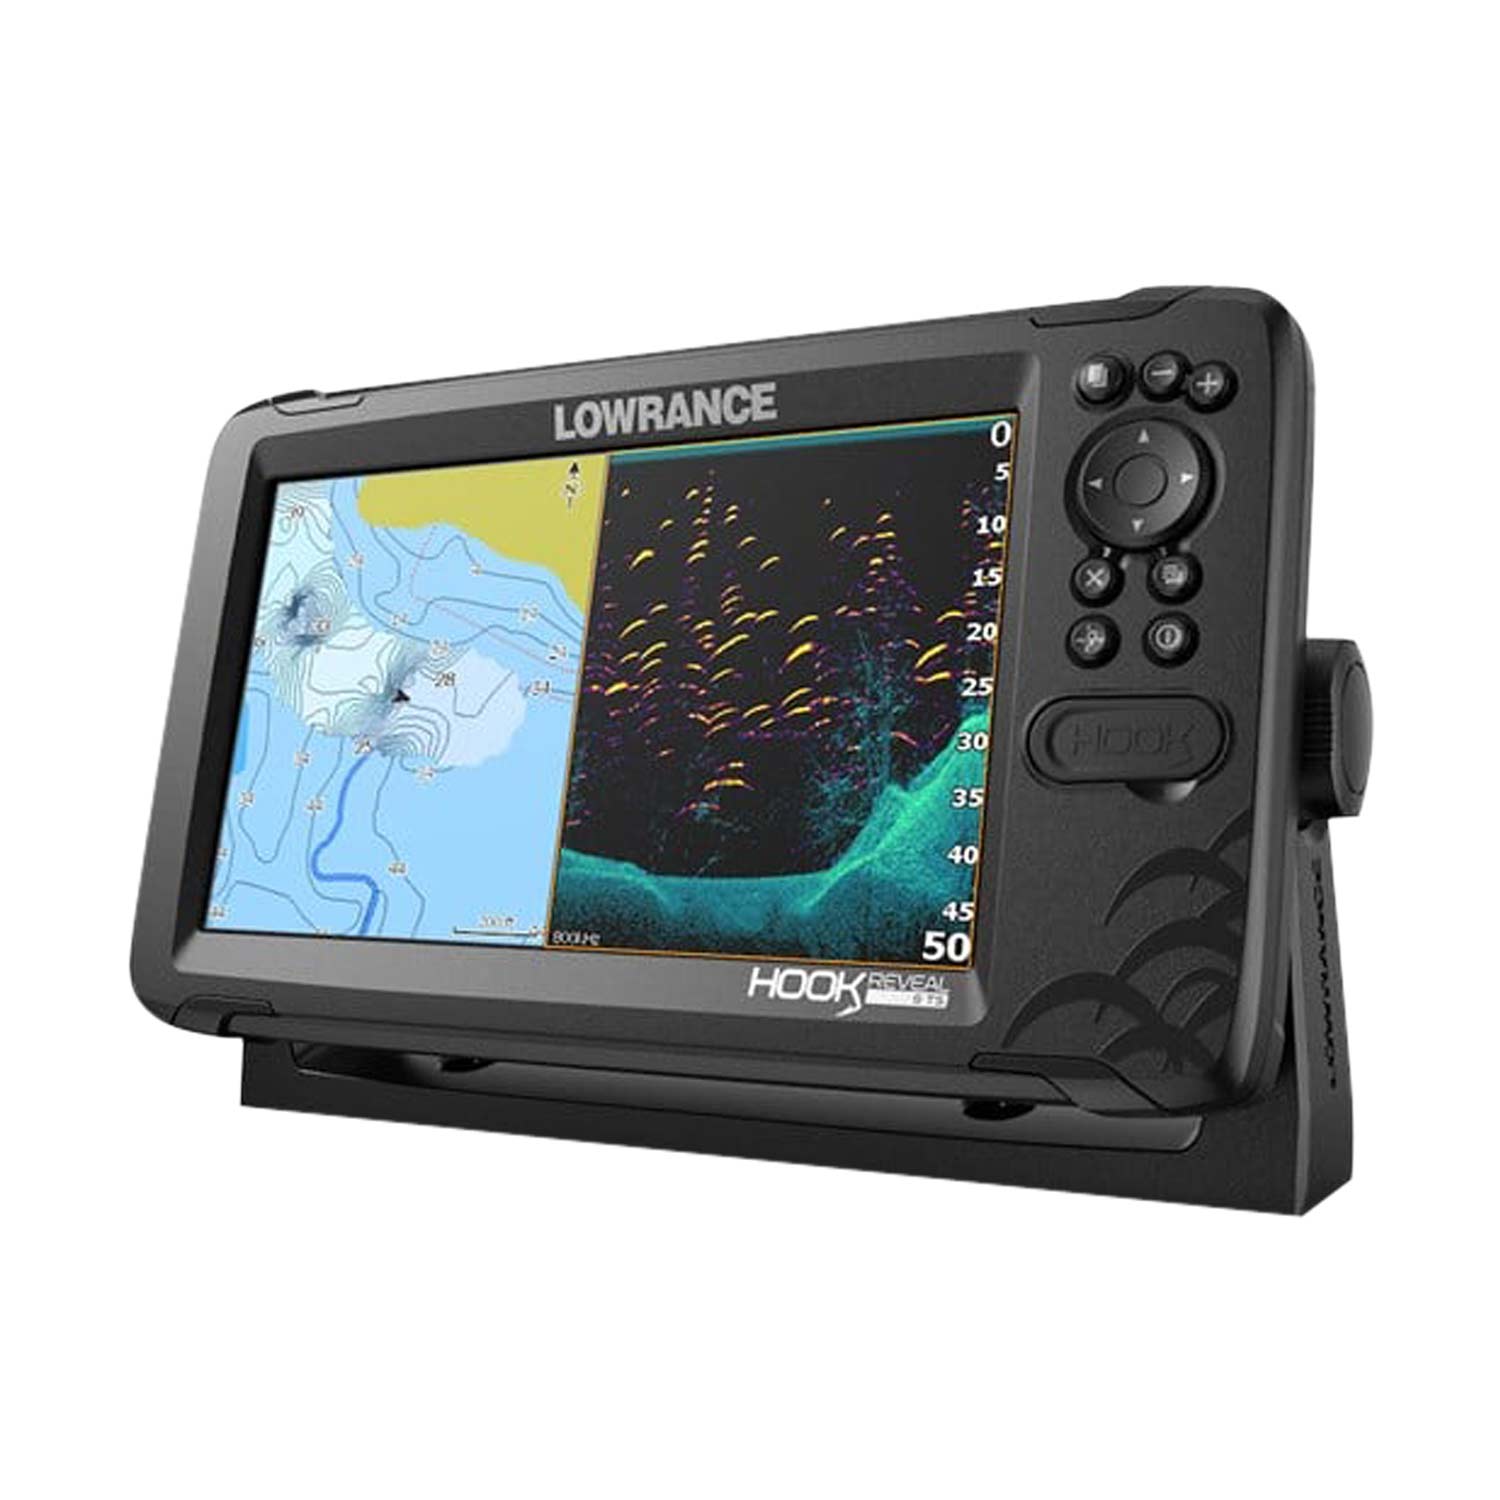 LOWRANCE HOOK Reveal 9 Triple Fishfinder/Chartplotter Combo with Tripleshot  Transducer and US Inland Charts